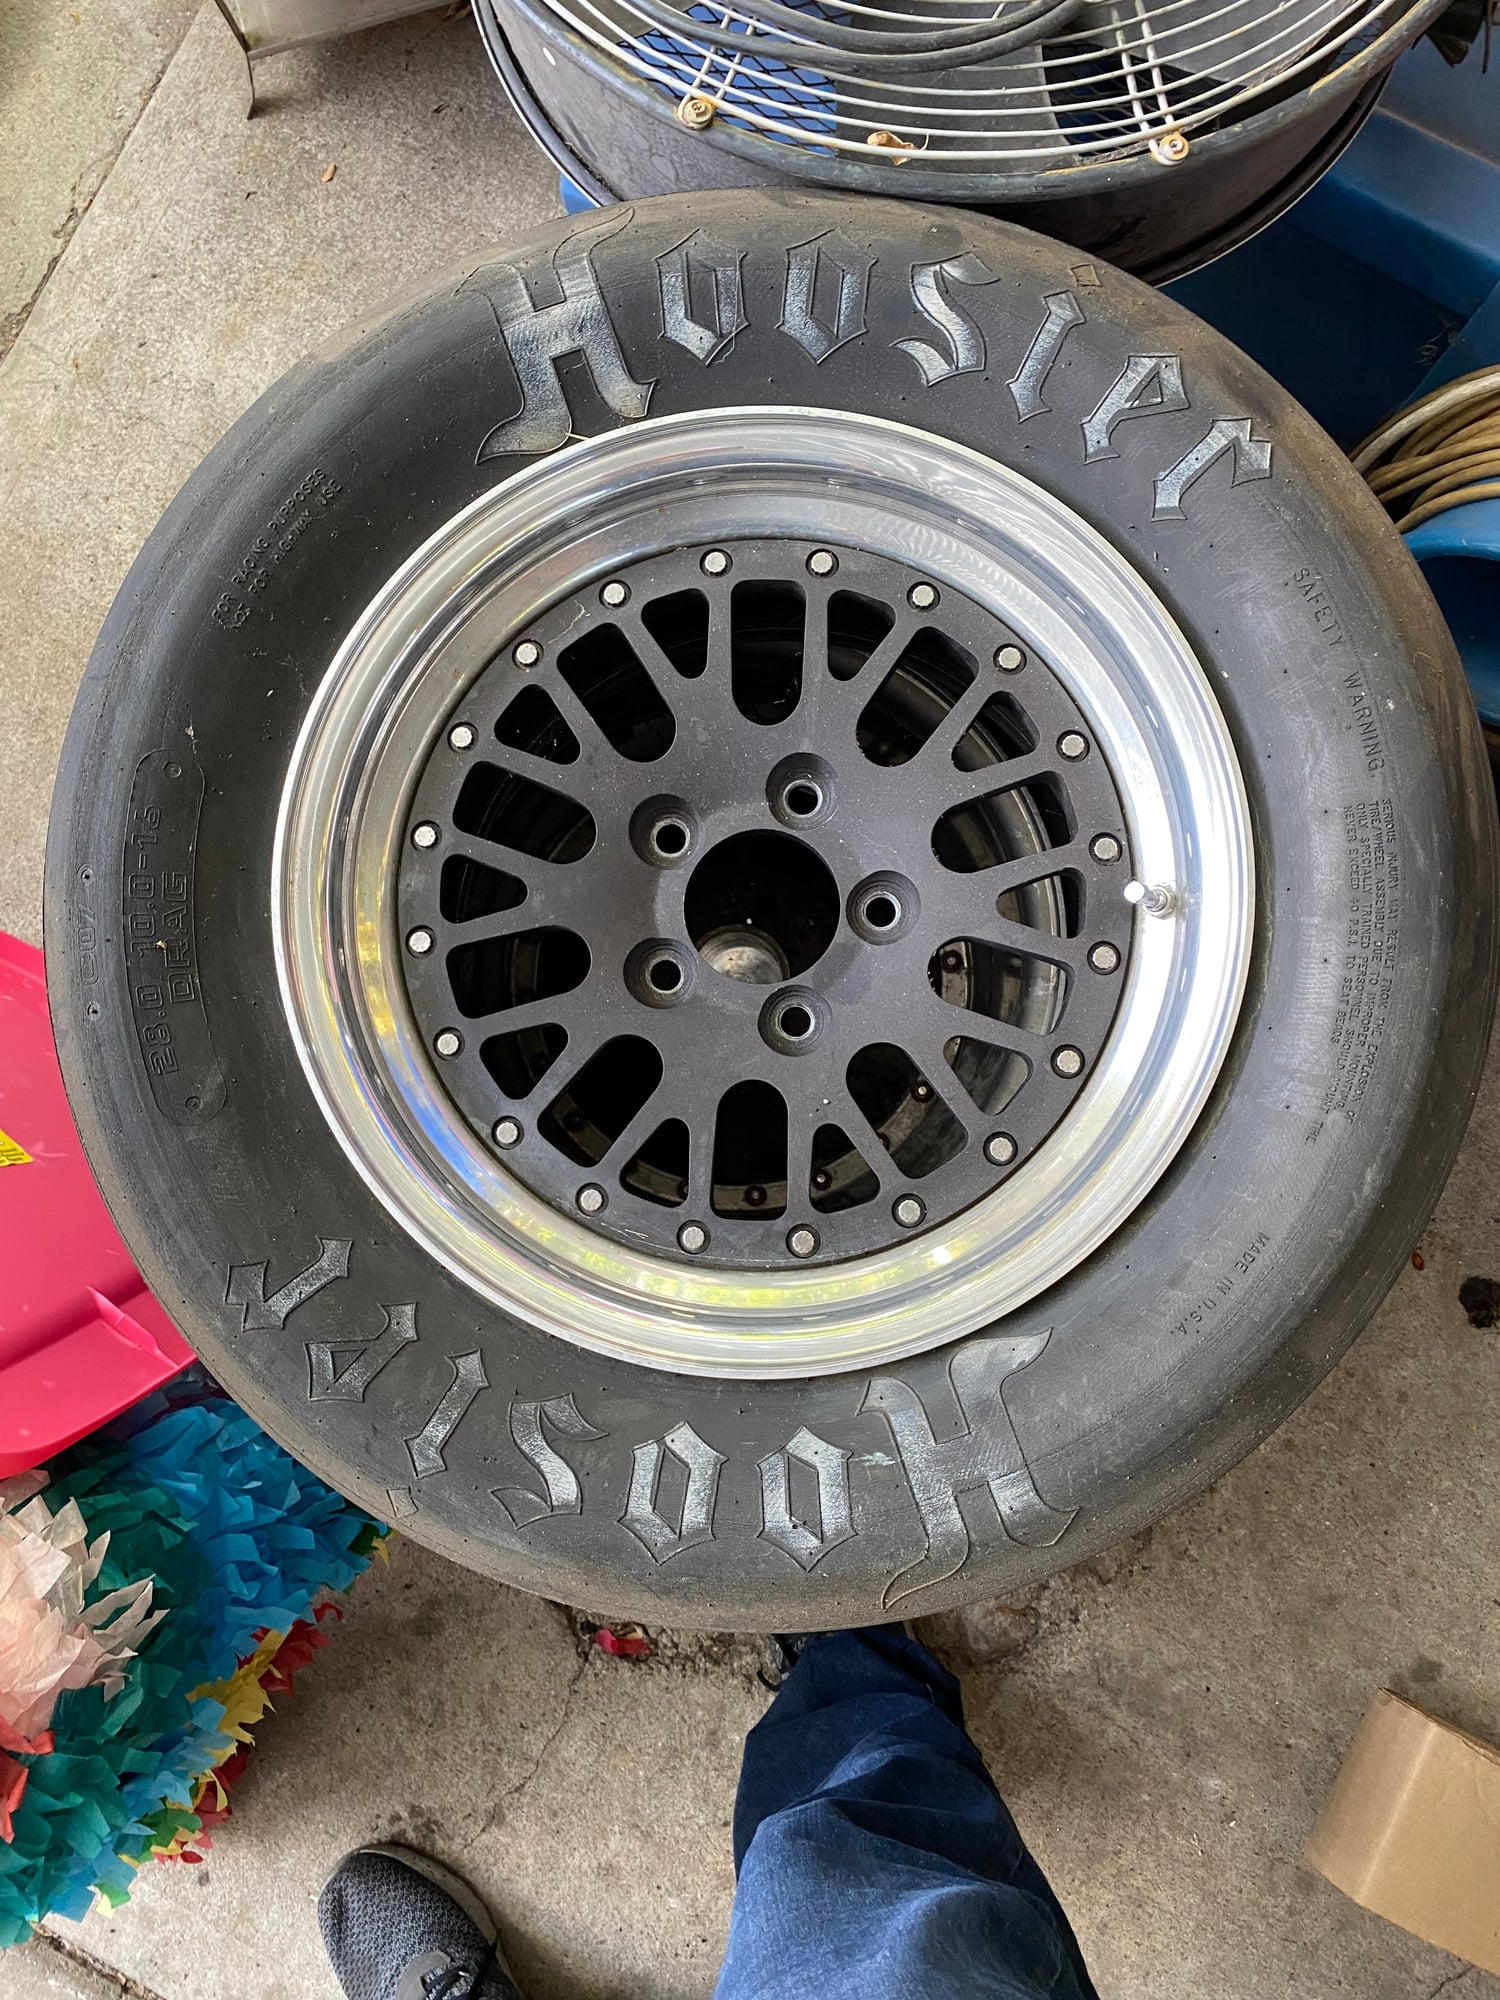 Wheels and Tires/Axles - Drag wheel setup - Used - All Years Any Make All Models - Lancaster, CA 93534, United States